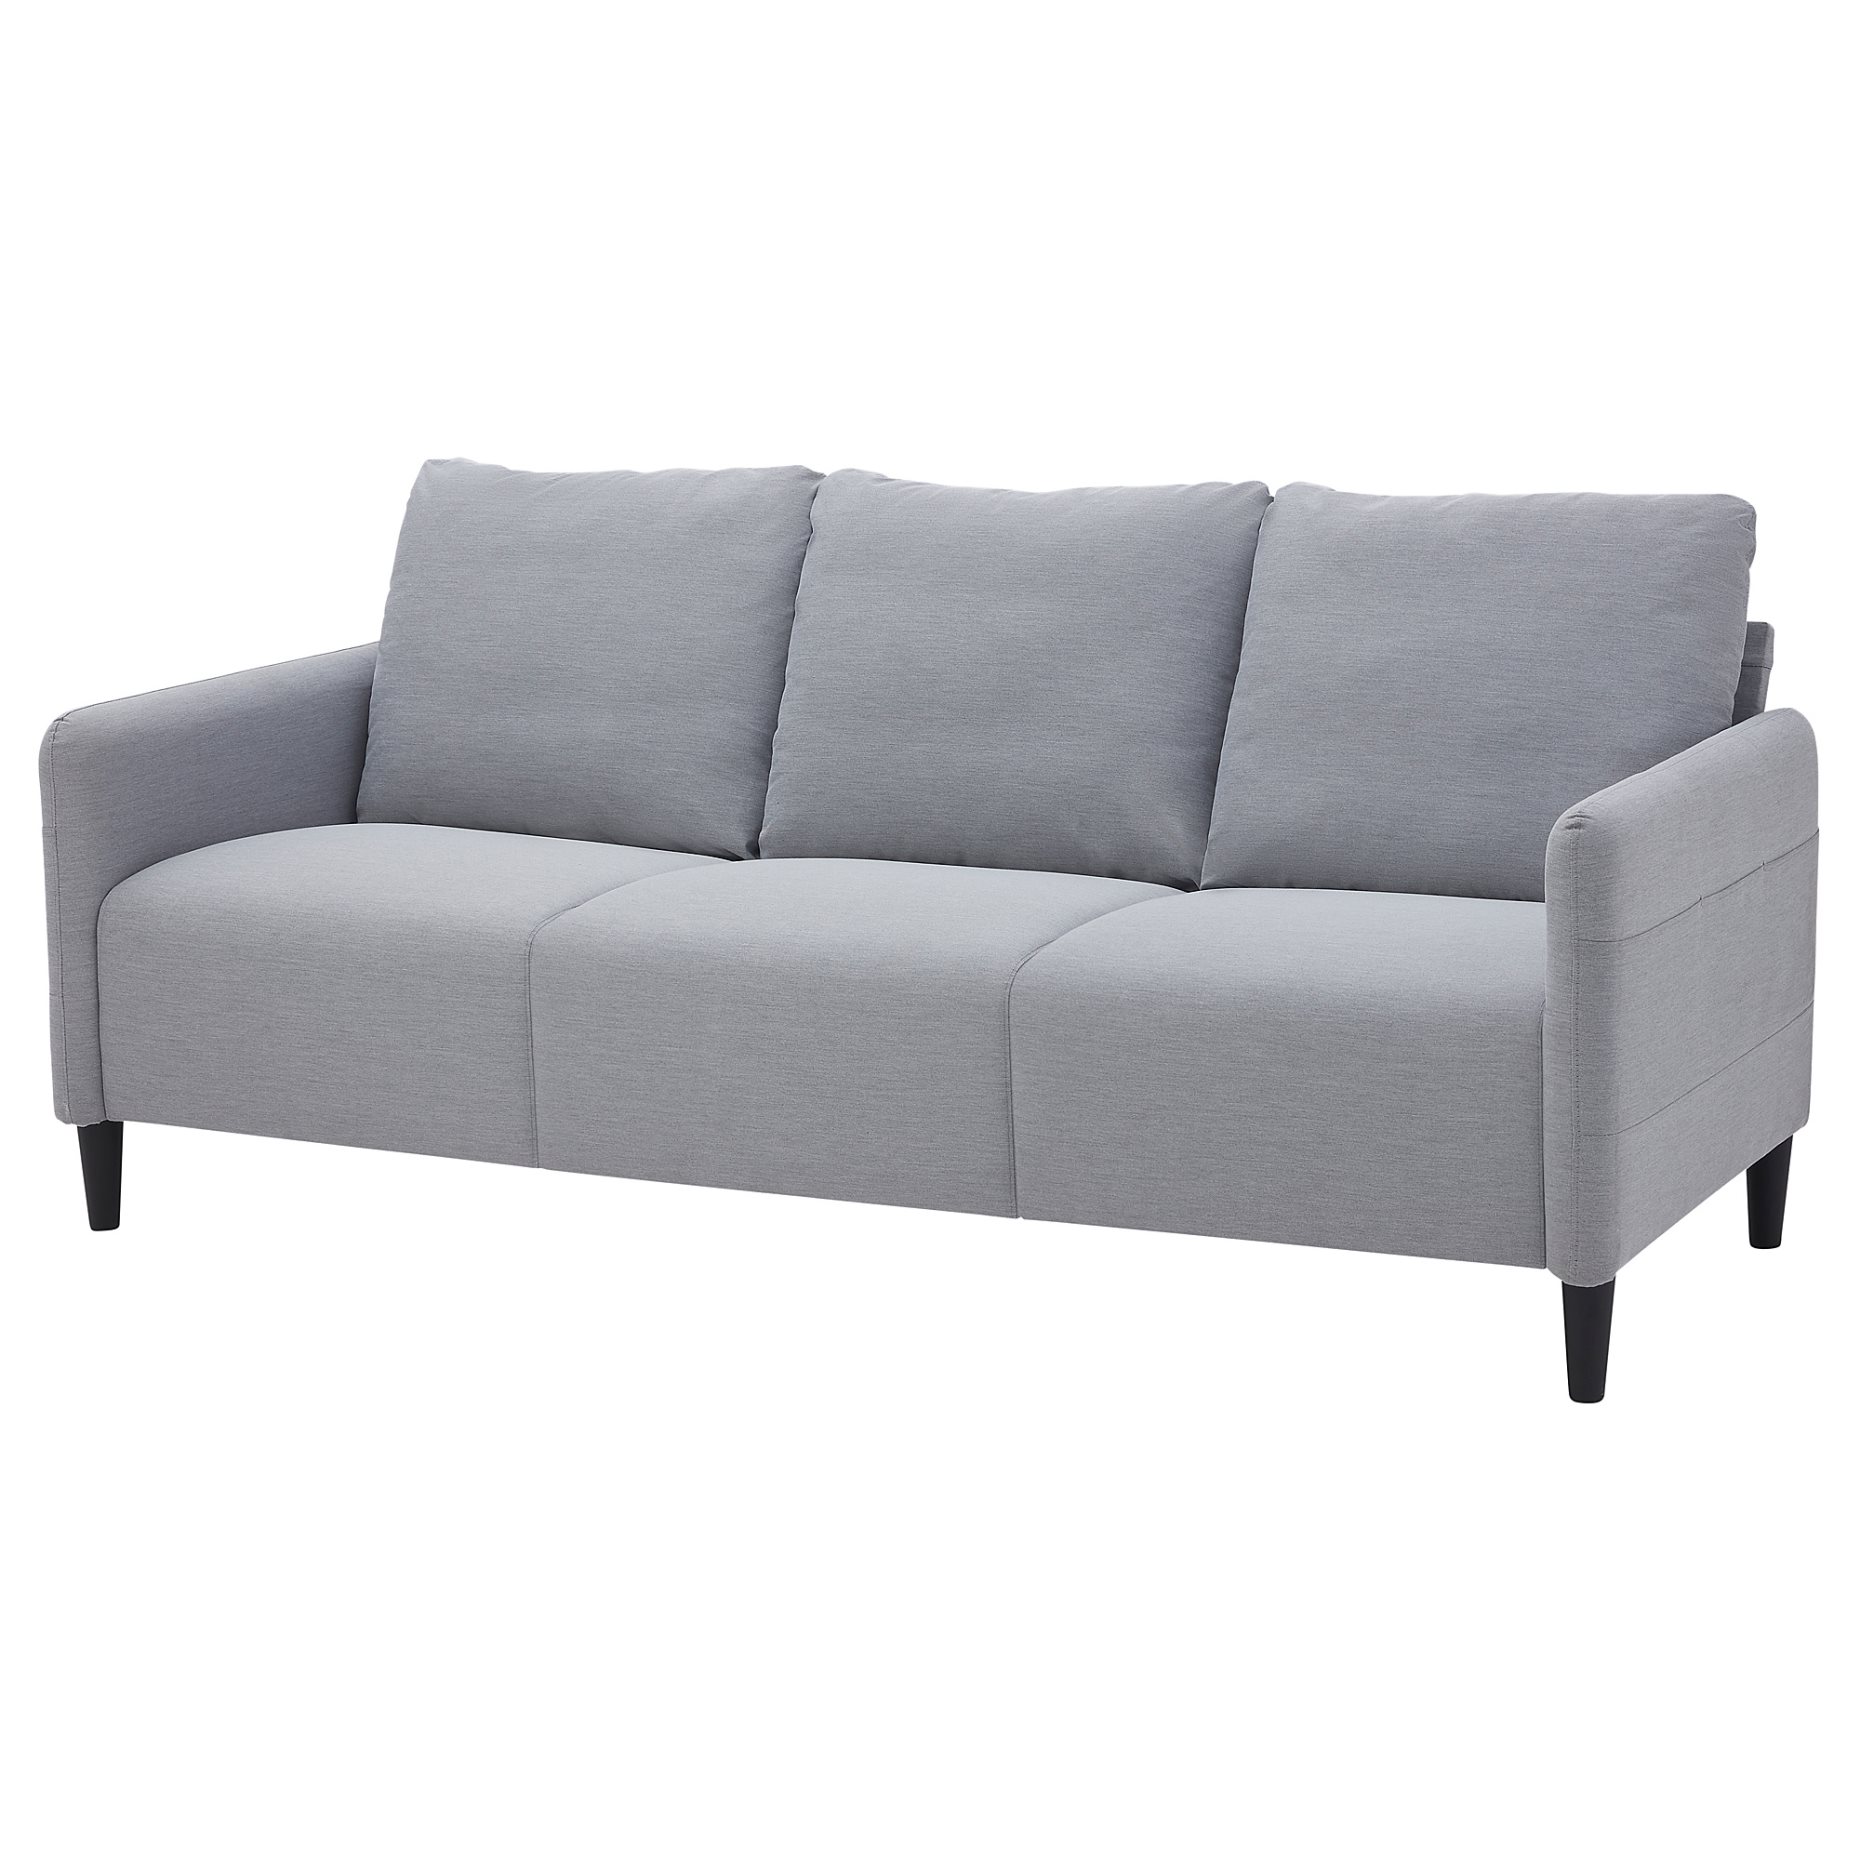 ANGERSBY, 3-seat sofa, 904.990.66